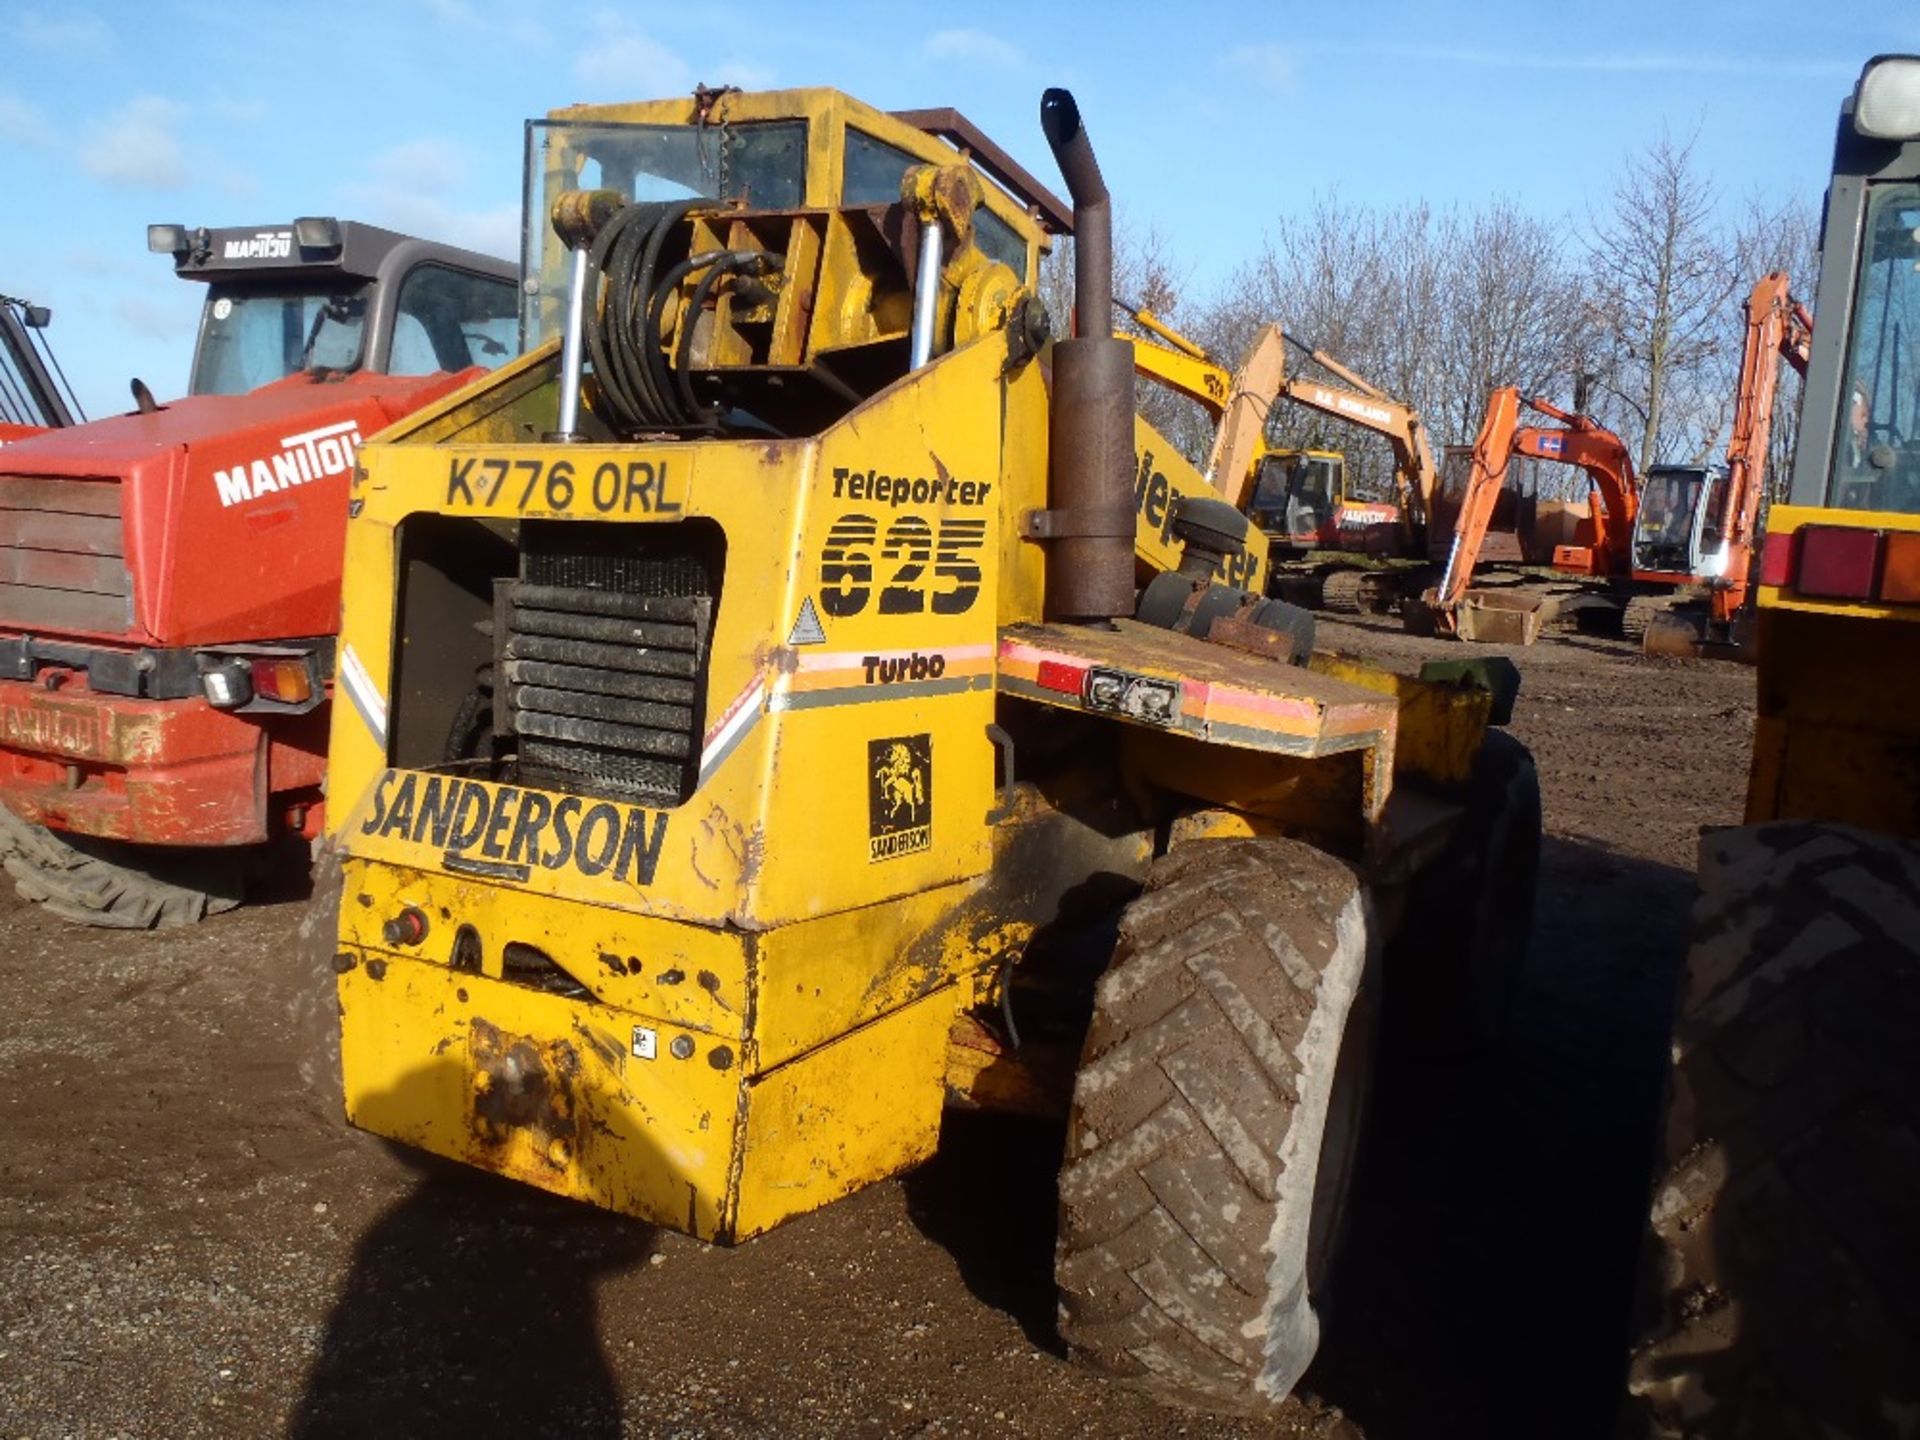 Sanderson 625 Turbo Telehandler with Perkins Engine. V5 will be supplied. Reg No. K776 ORL - Image 2 of 3